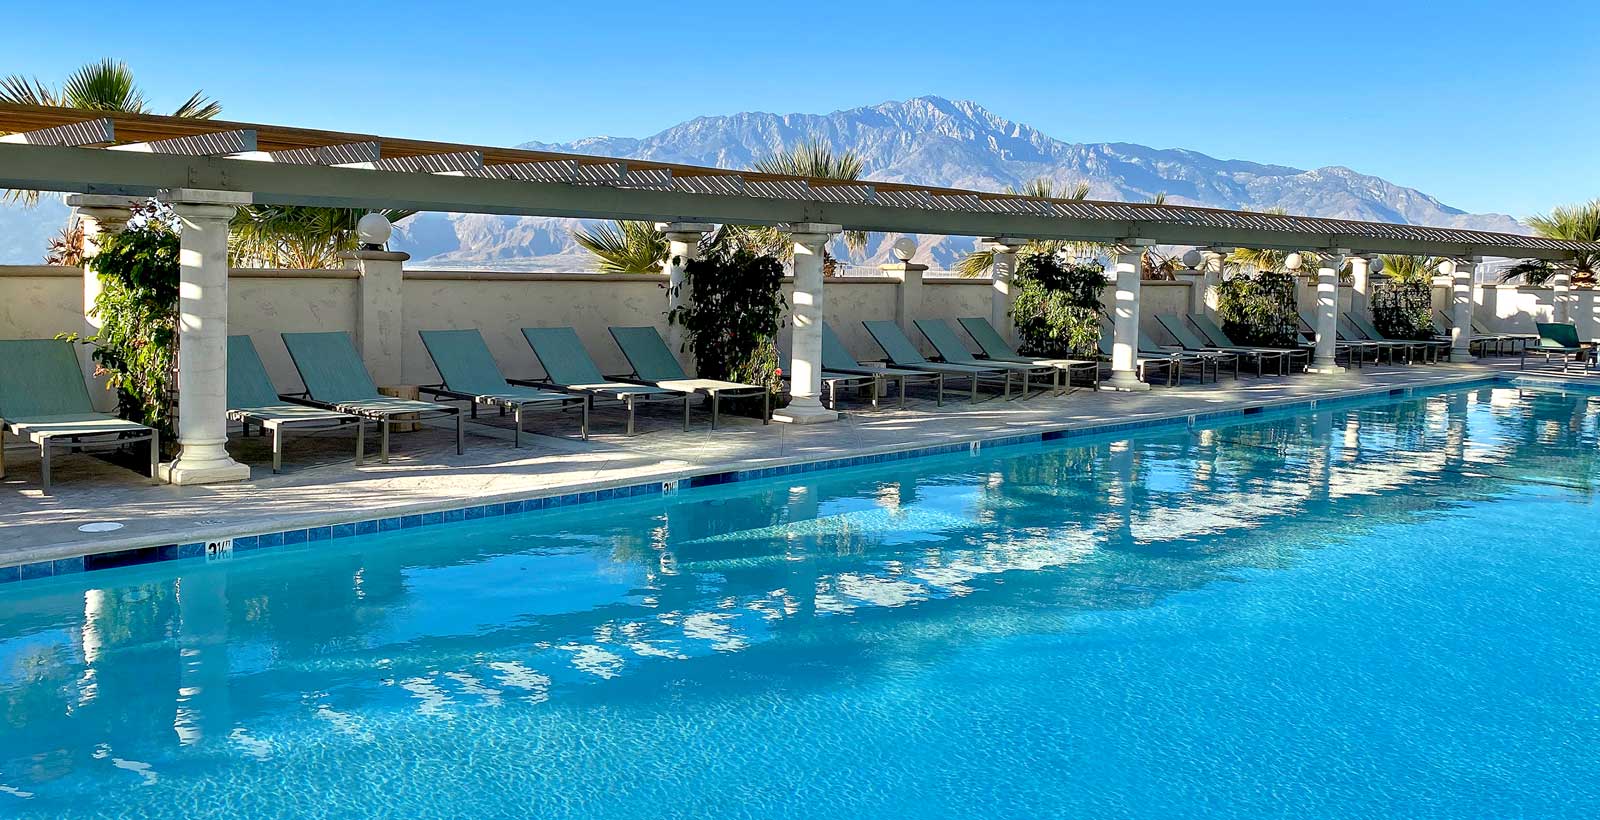 Mineral Pool at Azure Palm Hot Springs and view of Mt San Jacinto